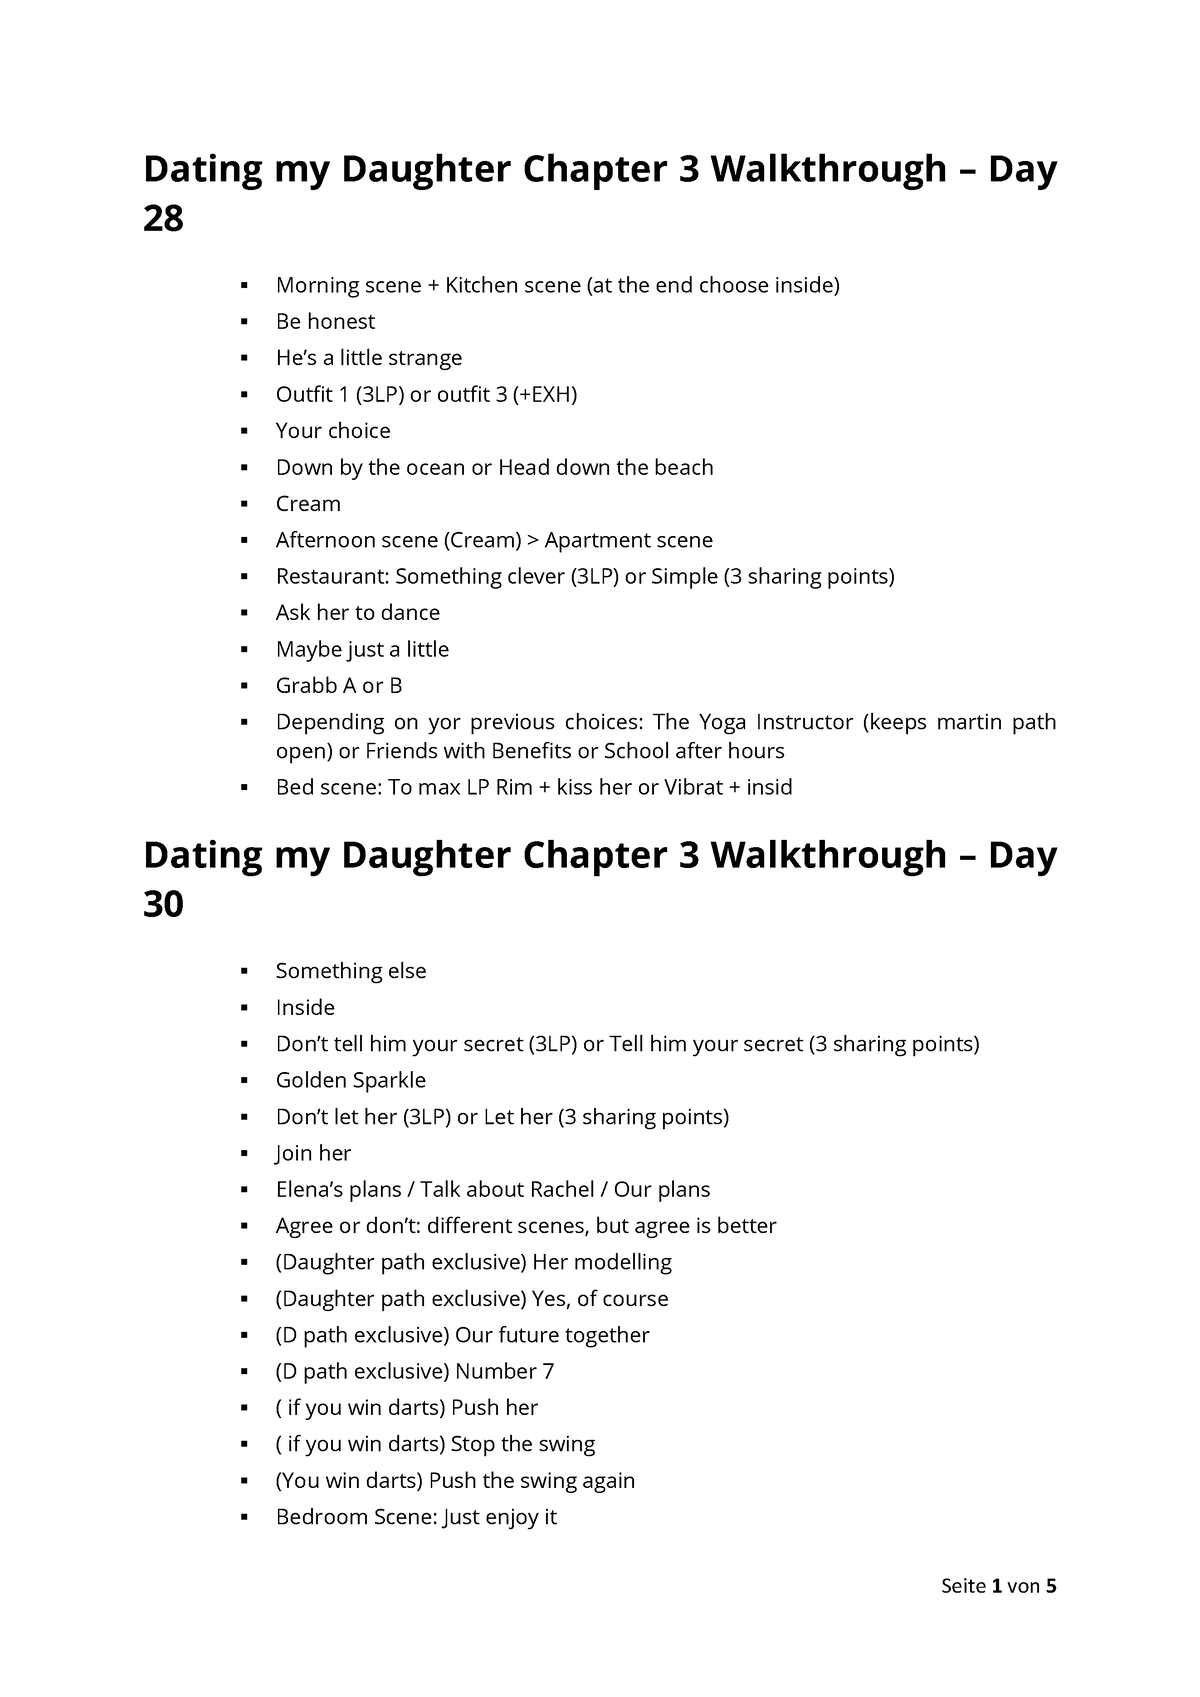 Dating my daughter ch3